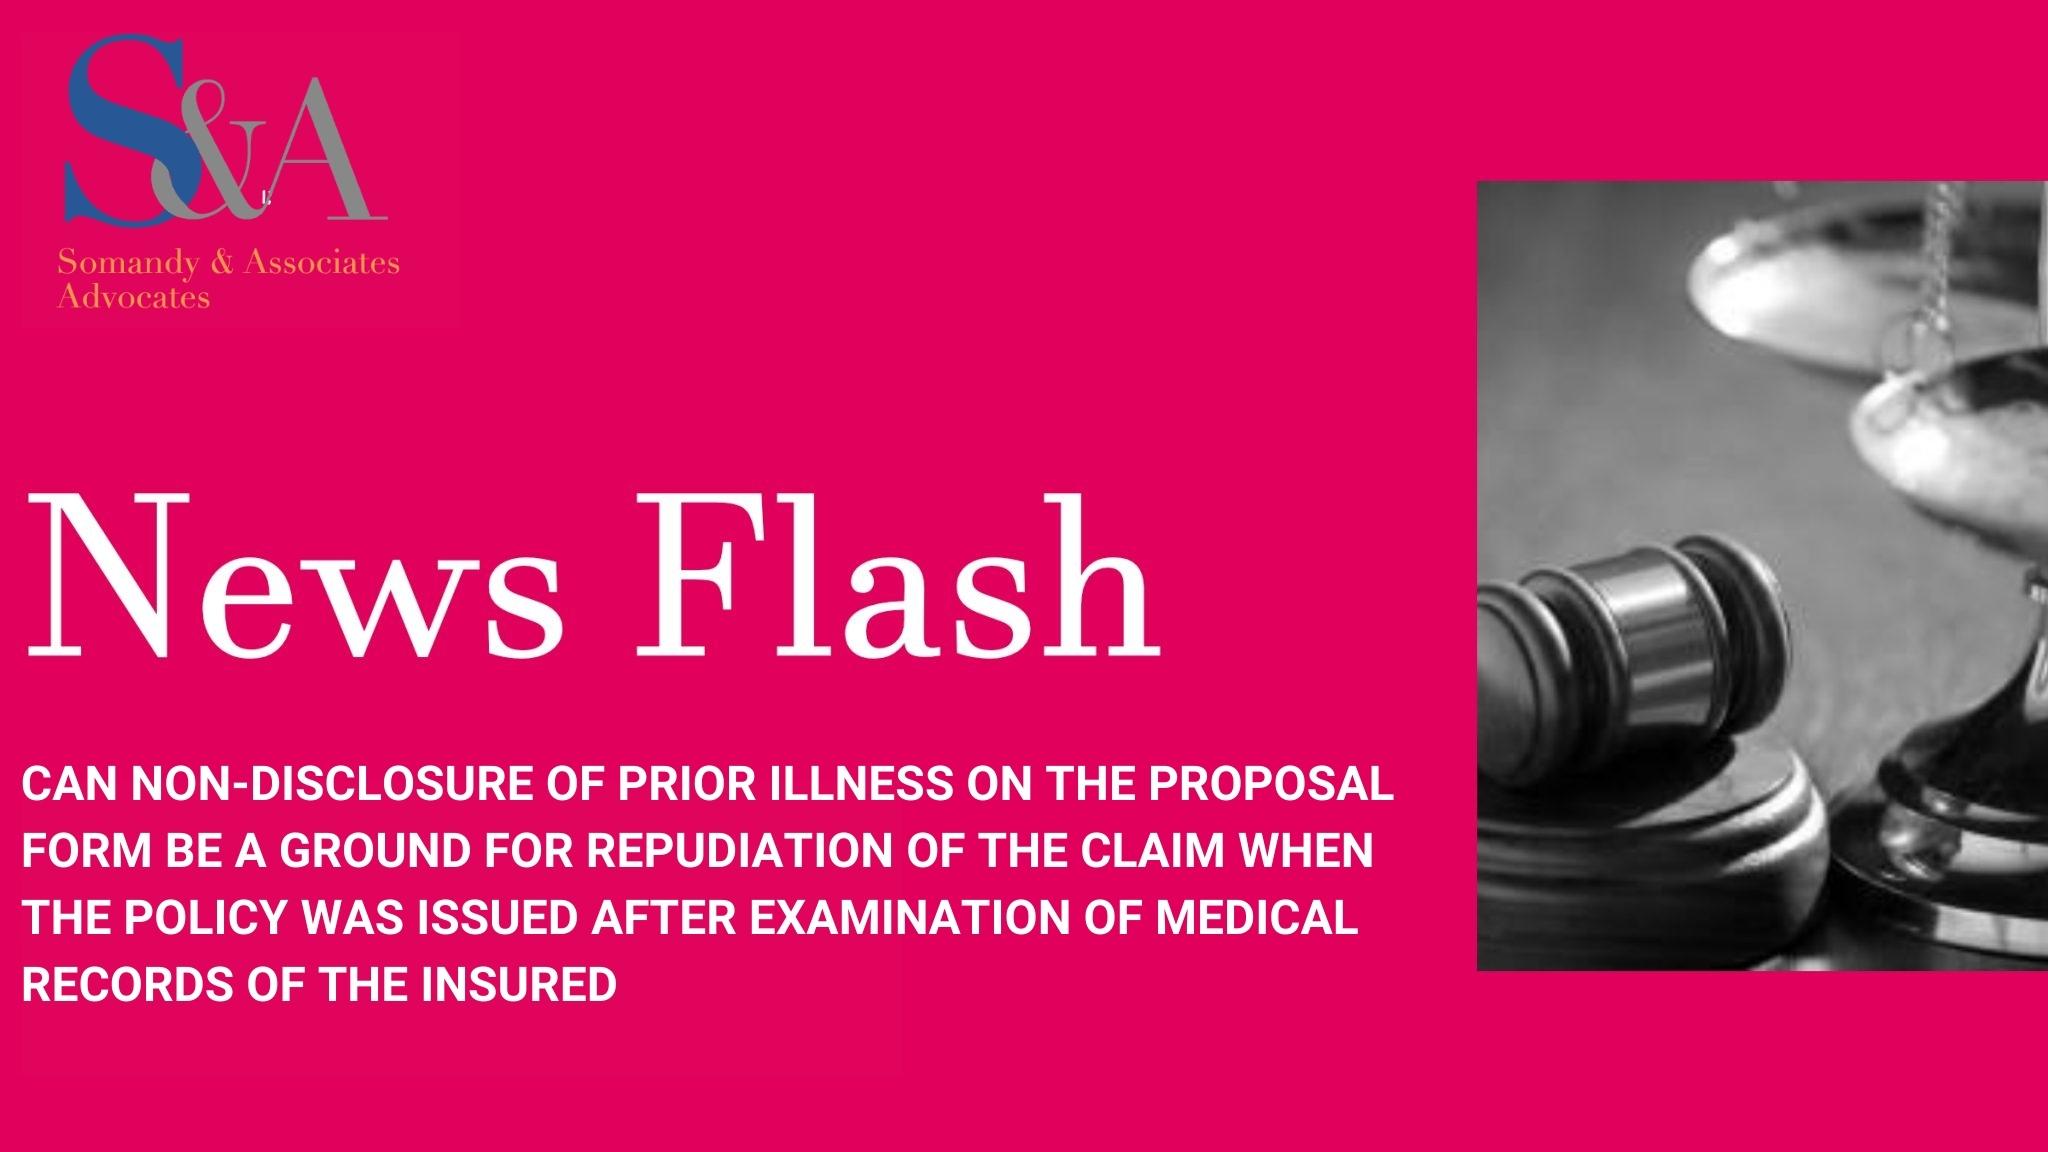 Can Non-Disclosure of Prior Illness on the Proposal Form Be a Ground for Repudiation of the Claim?